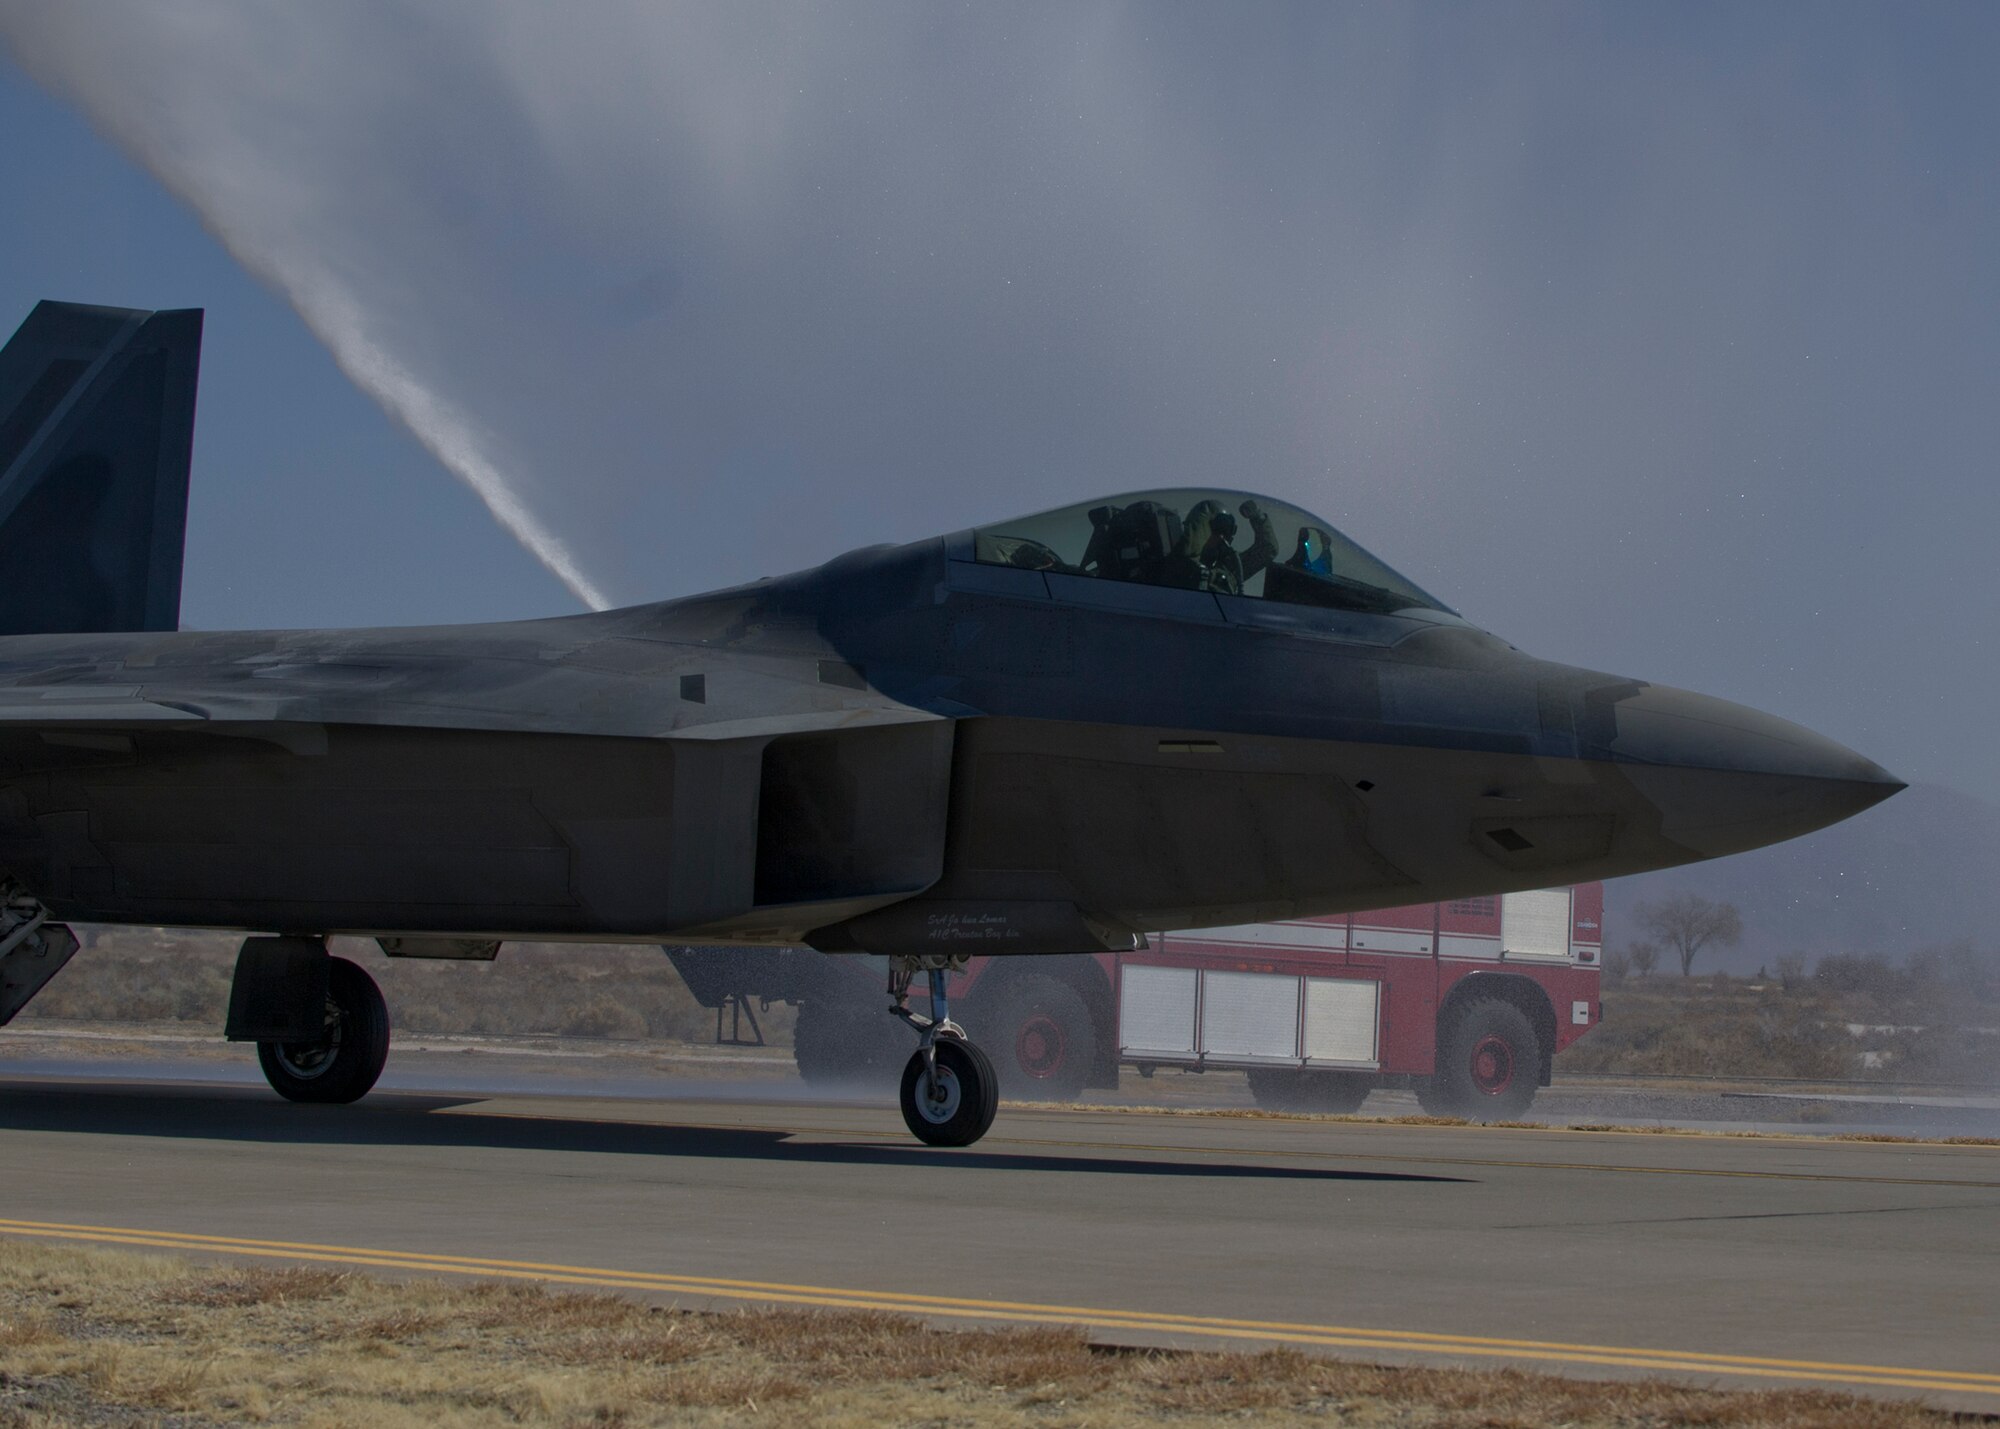 An F-22 Raptor pilot celebrates at Holloman Air Force Base N.M., after completing the final four-ship tactical sortie over the Tularosa Basin Feb. 20. The 7th Fighter Squadron and members of the Holloman community celebrated this final sortie before the F-22s depart for Tyndall Air Force Base, Fla., in early April. (U.S. Air Force photo by Airman 1st Class Chase Cannon/Released)